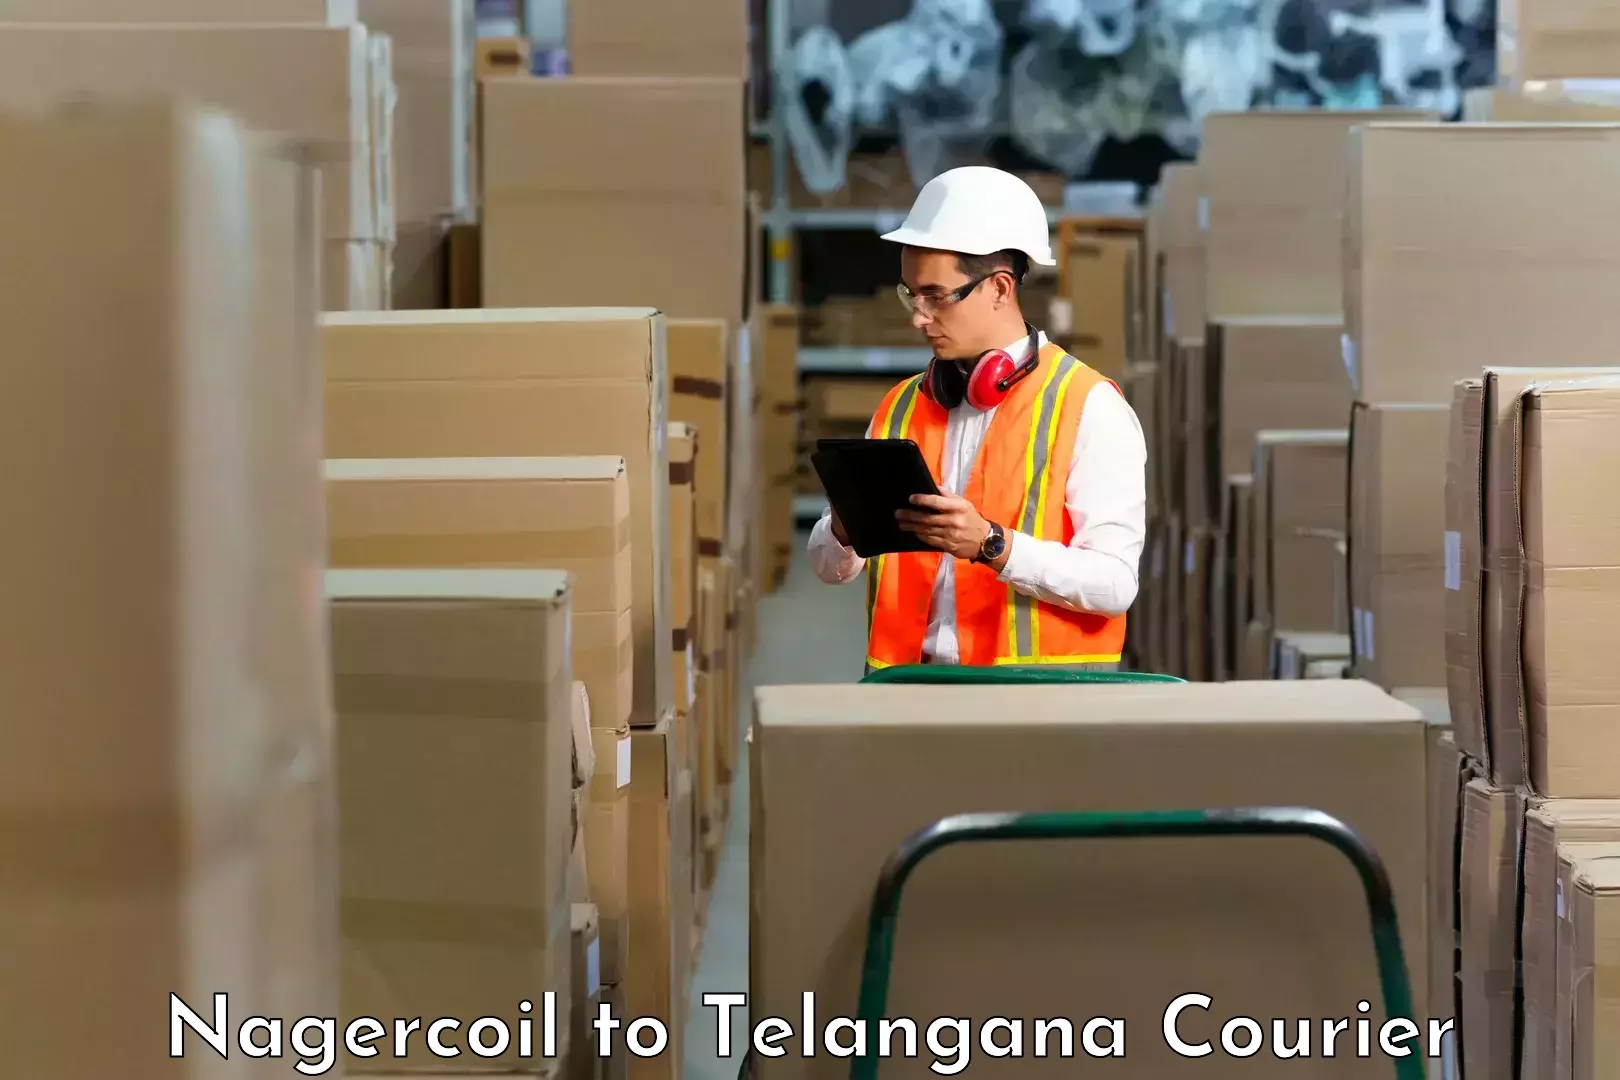 International courier networks Nagercoil to Netrang